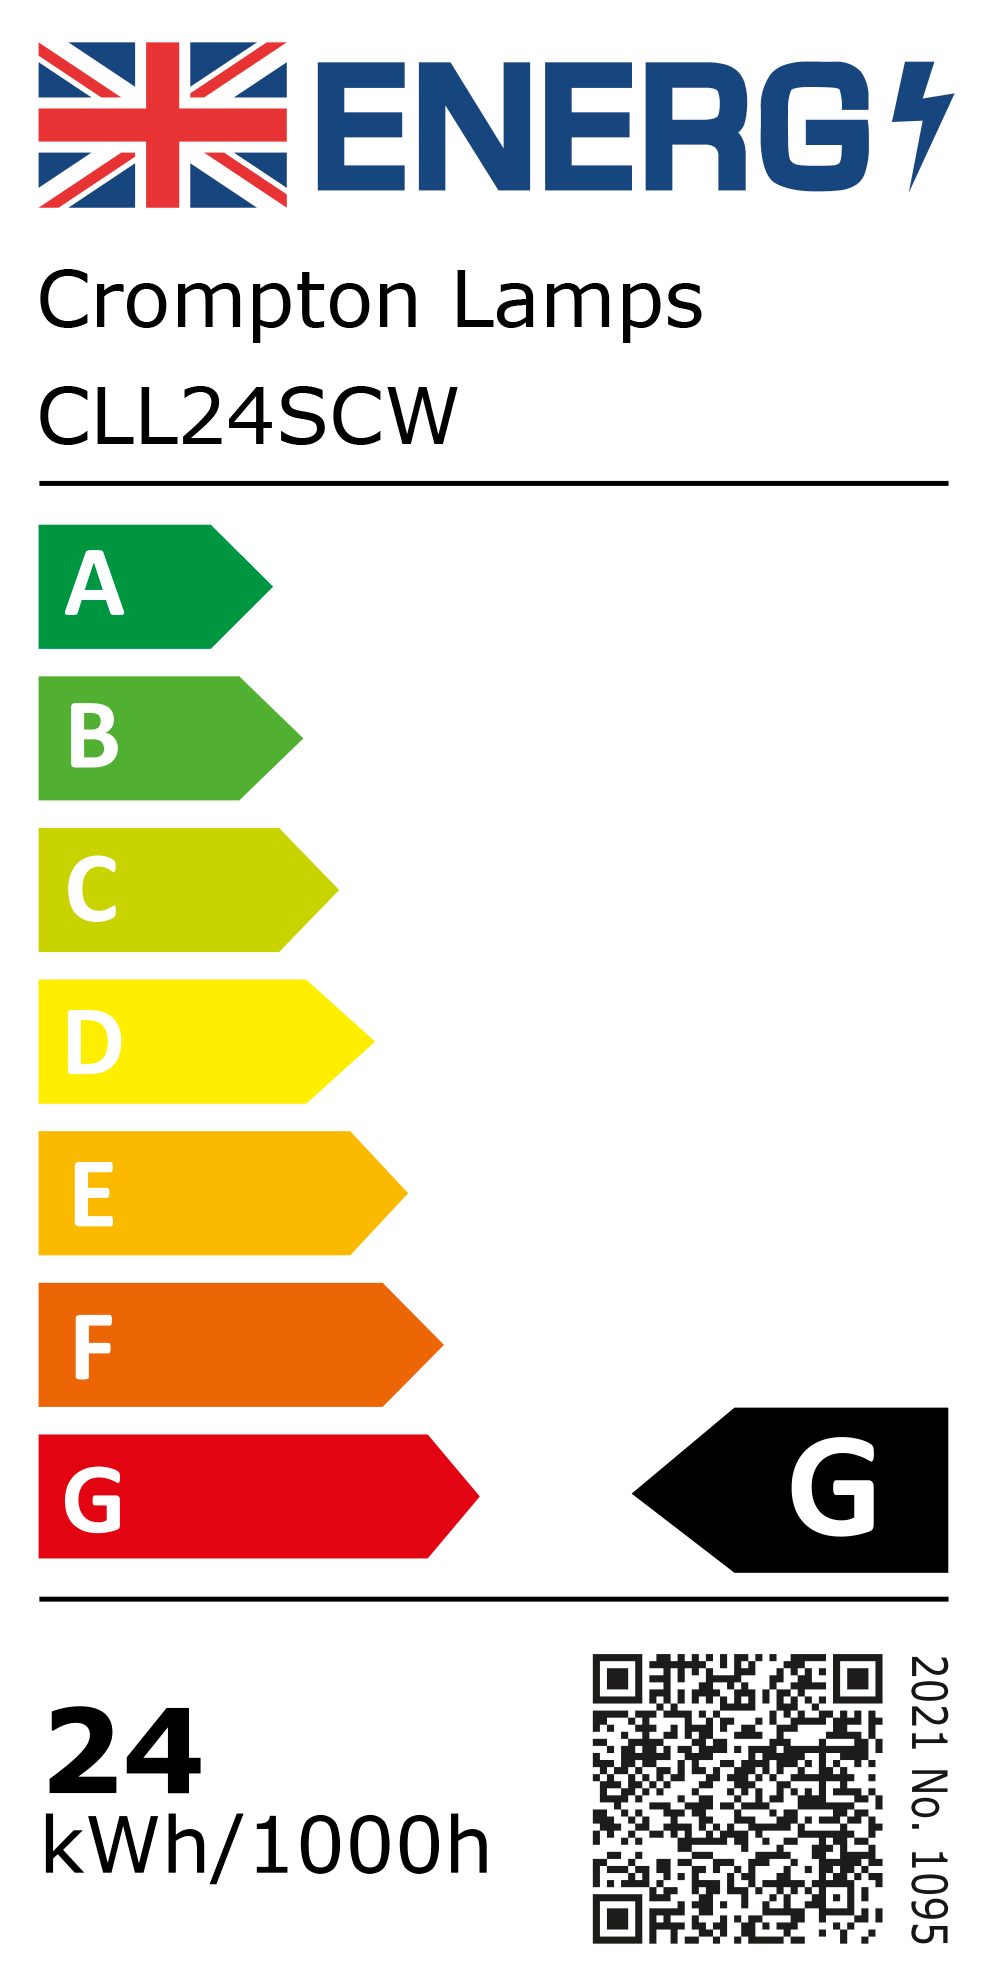 New 2021 Energy Rating Label: Stock Code CLL24SCW